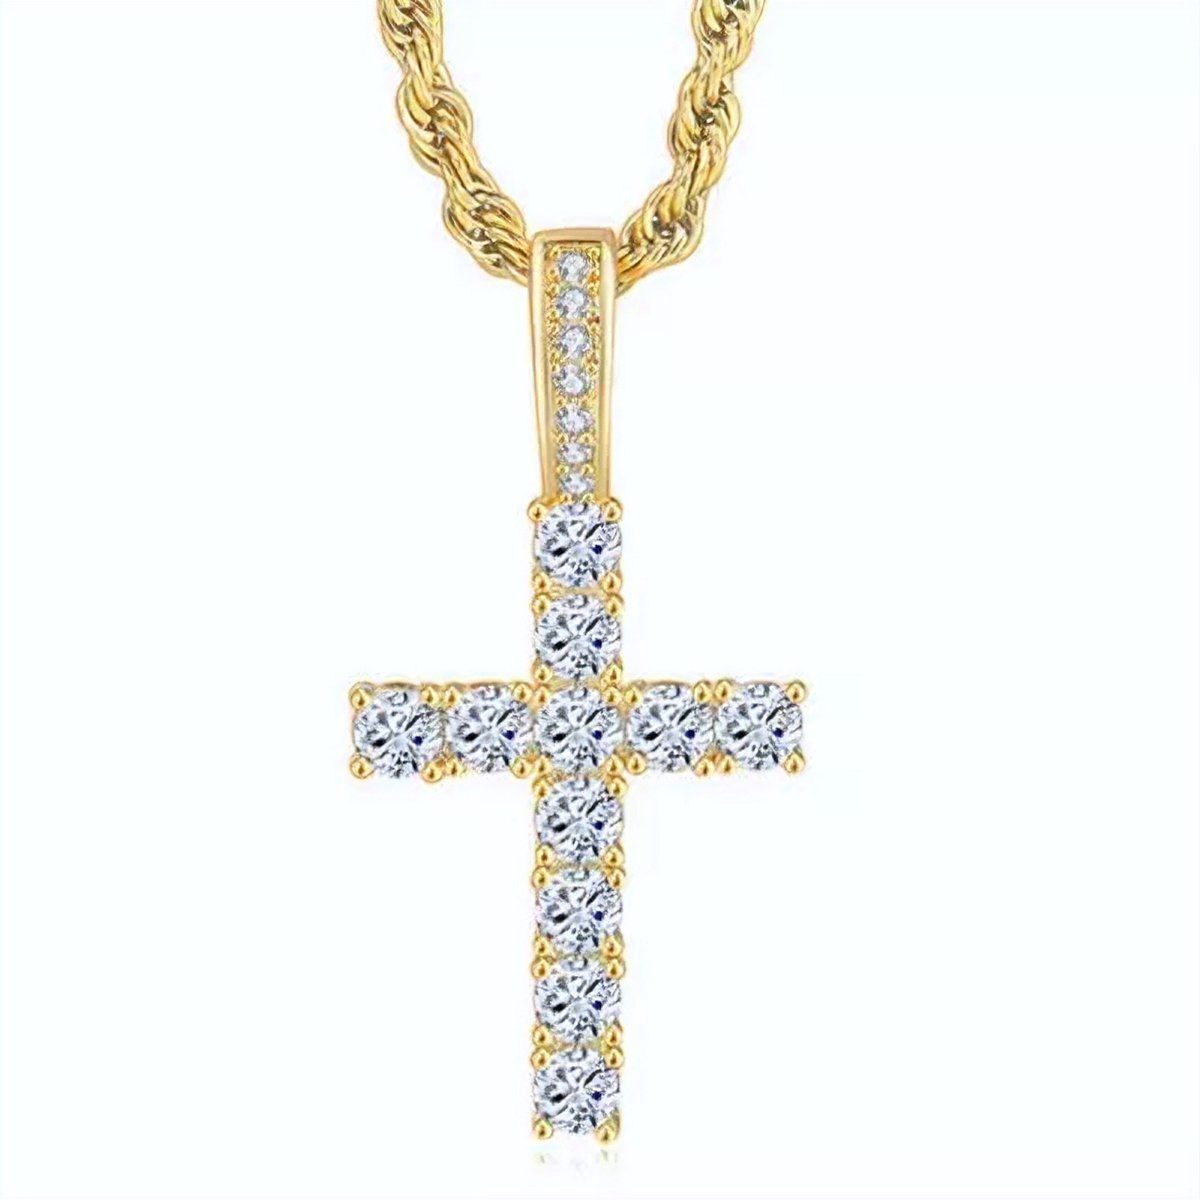 ICYBOY 18K Religieus Heren Ketting met Kruis Verguld Goud [GOLD-PLATED] [ICED OUT] [50CM] - Religious 3mm Twisted Chain Cubic Zirconia Cross Necklace Hip Hops Gold Plated Paved CZ Zircon Cross Necklace